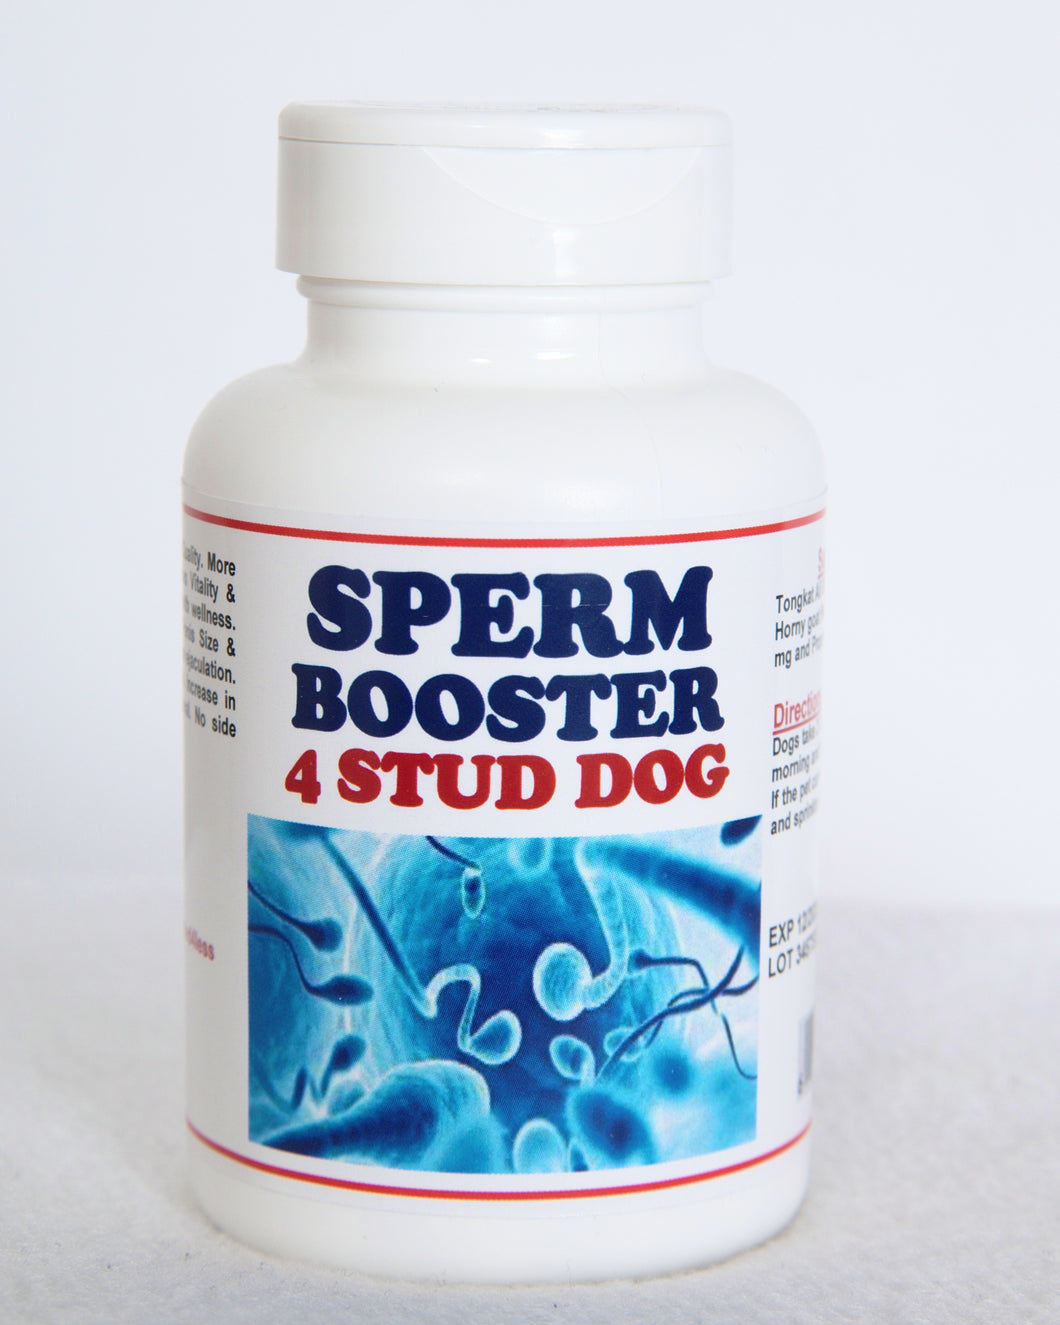 SPERM BOOSTERS FOR STUD DOG